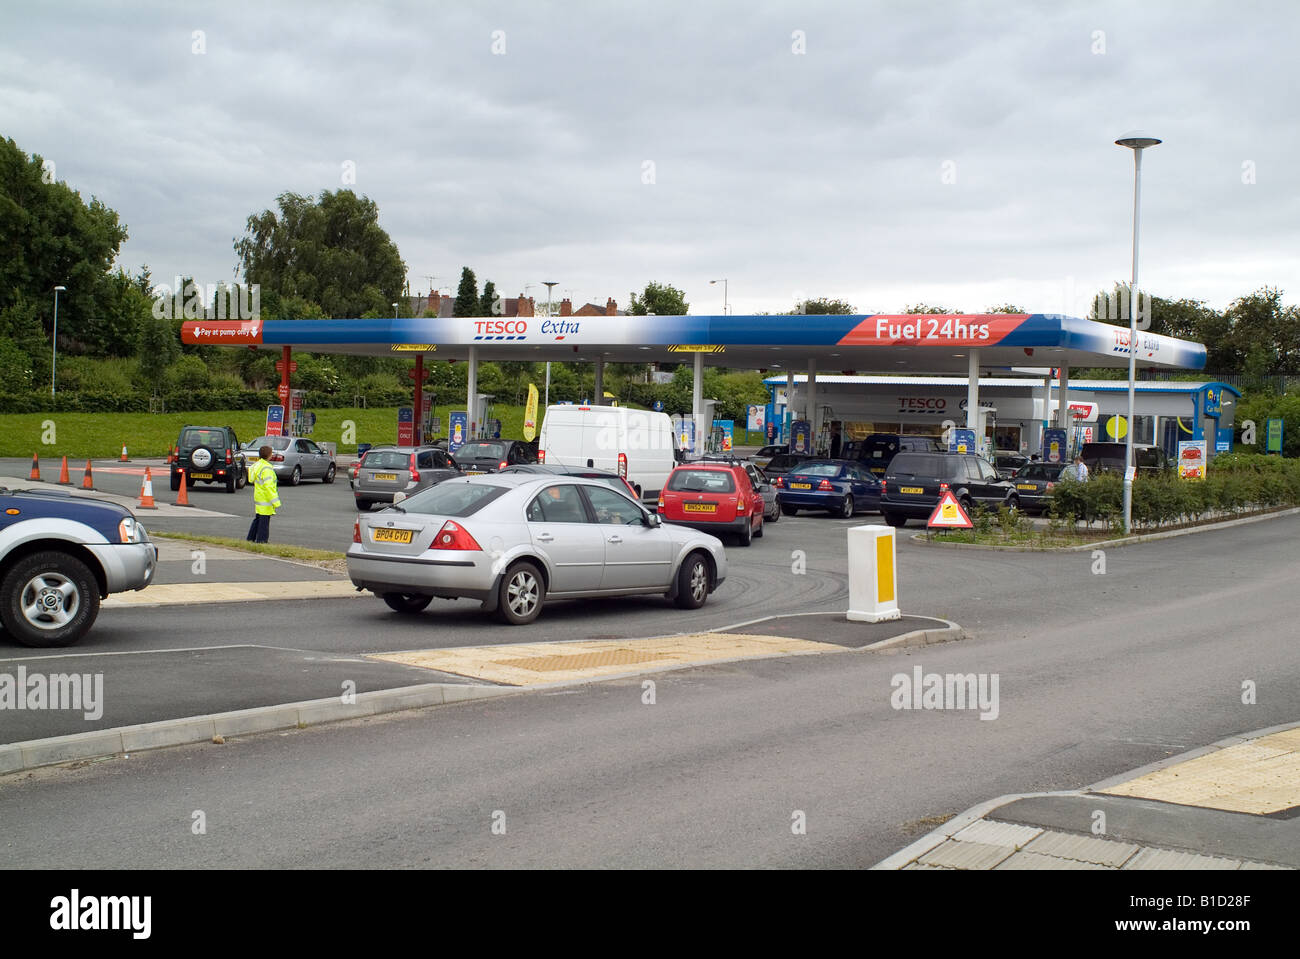 Queue of cars at petrol filling station Stock Photo